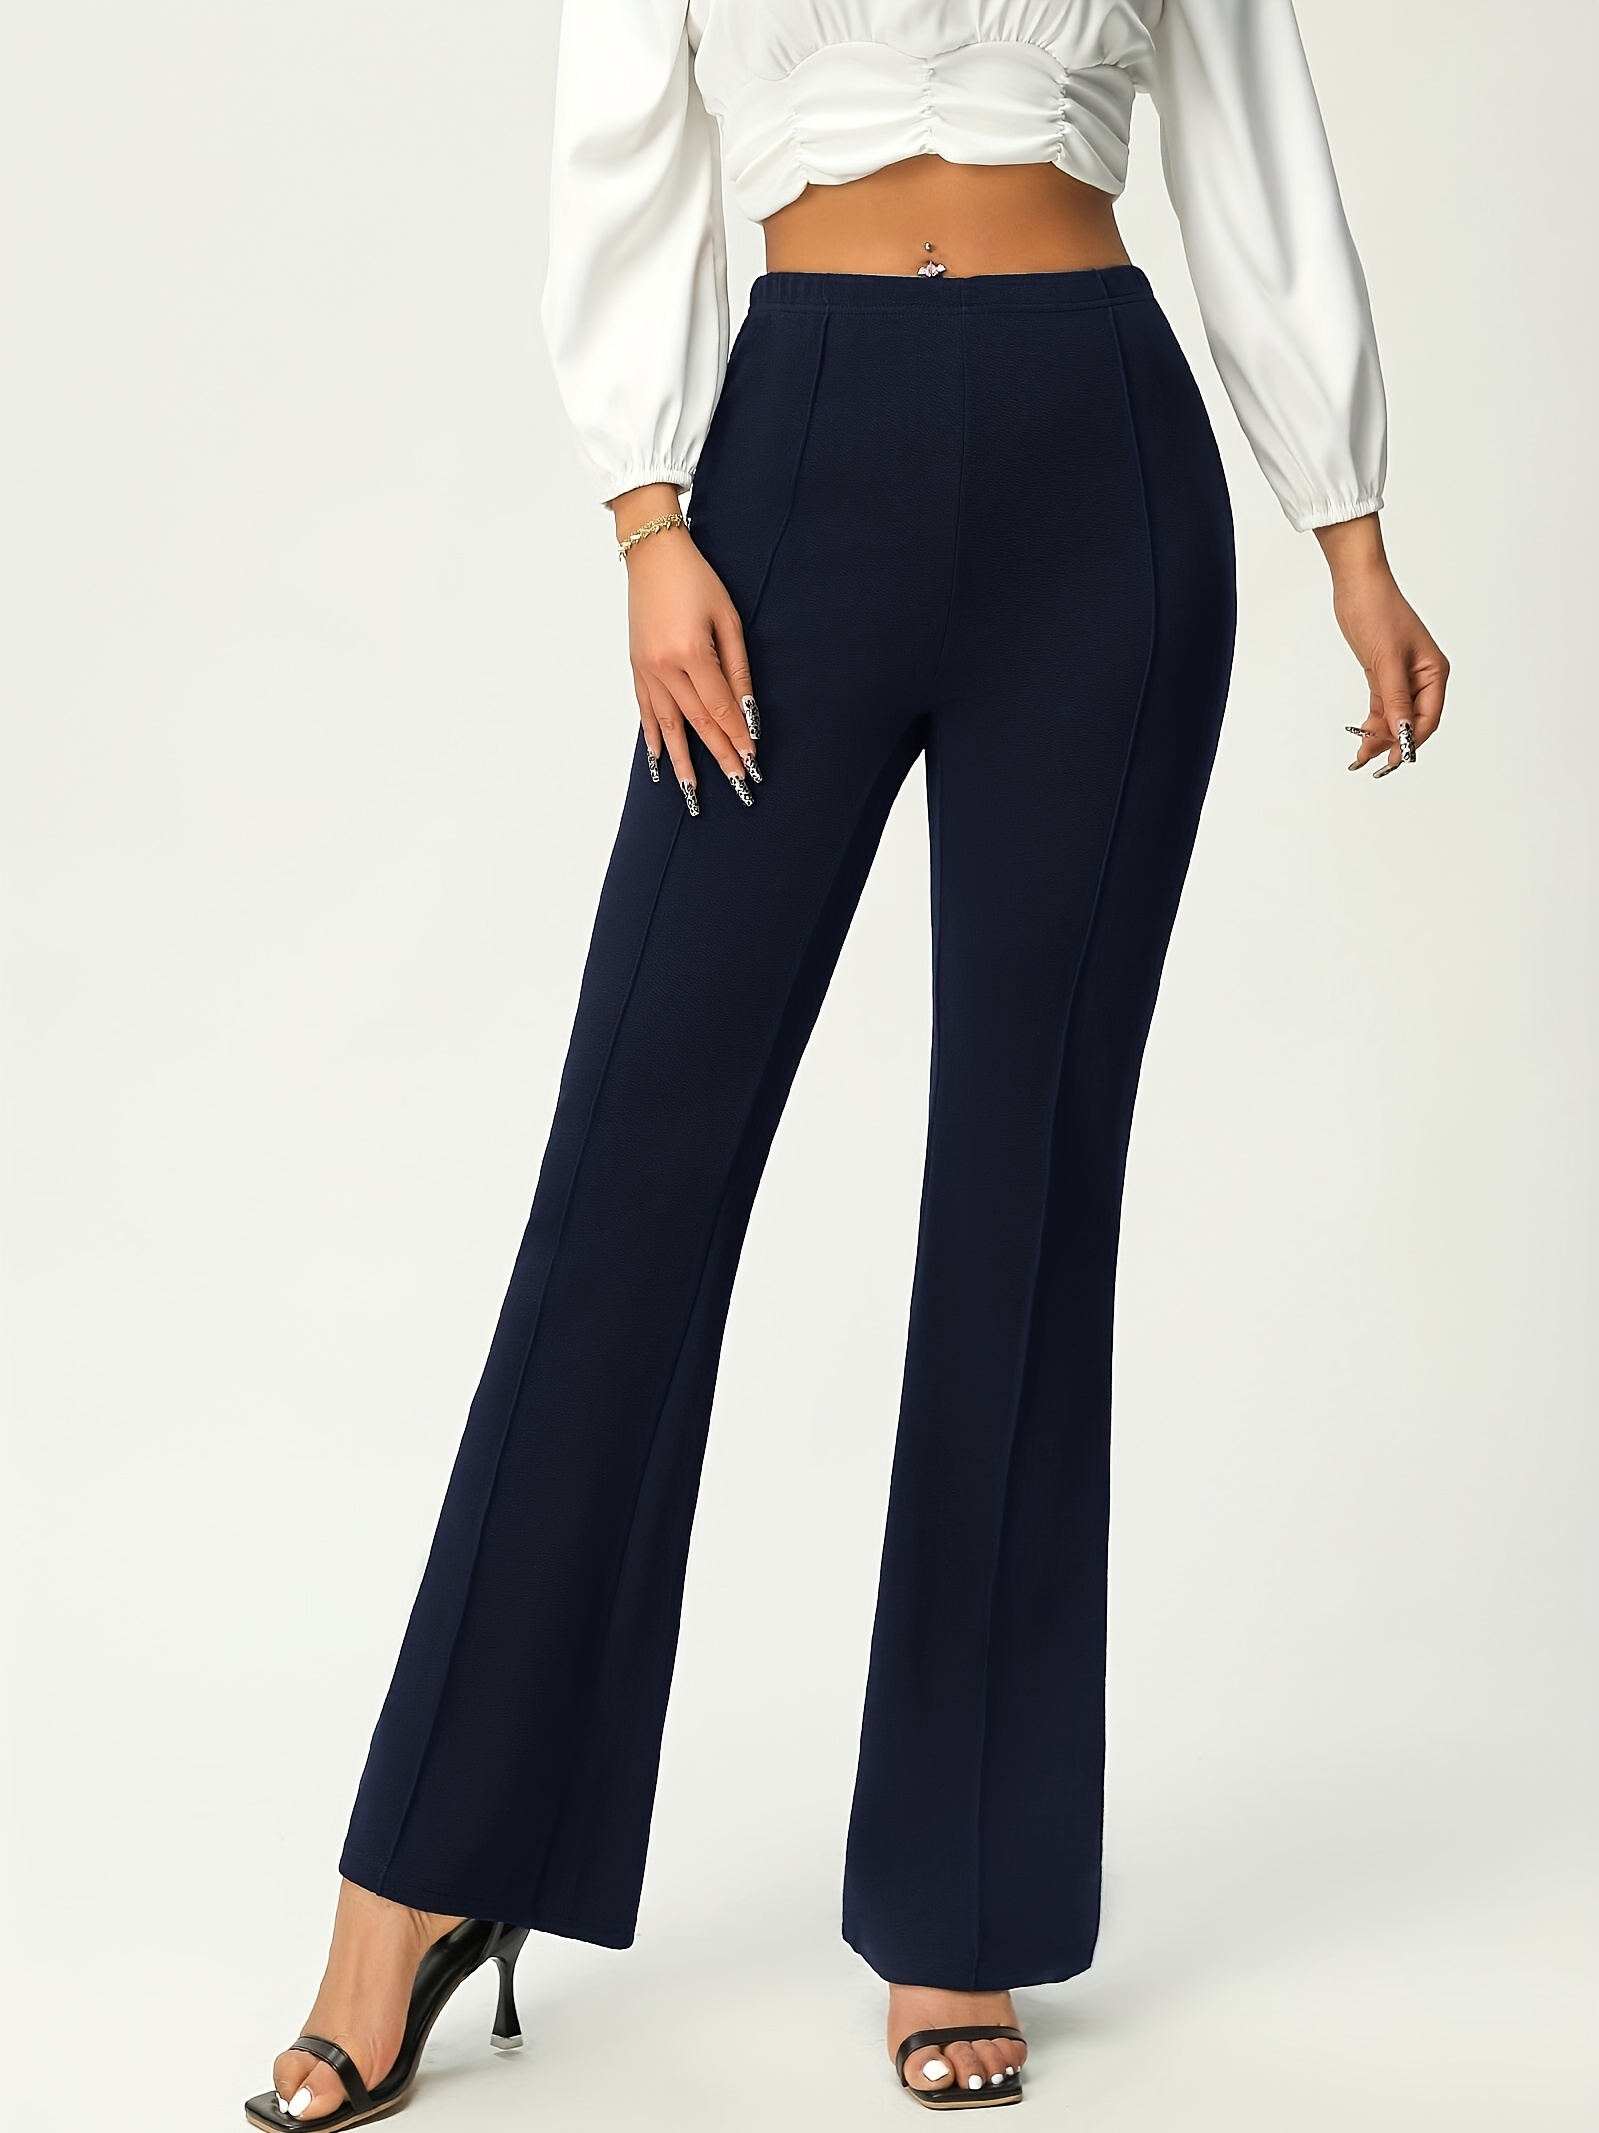 Navy High Waist Fitted Palazzo Pants  Business outfits women, Professional  outfits, Work outfits women